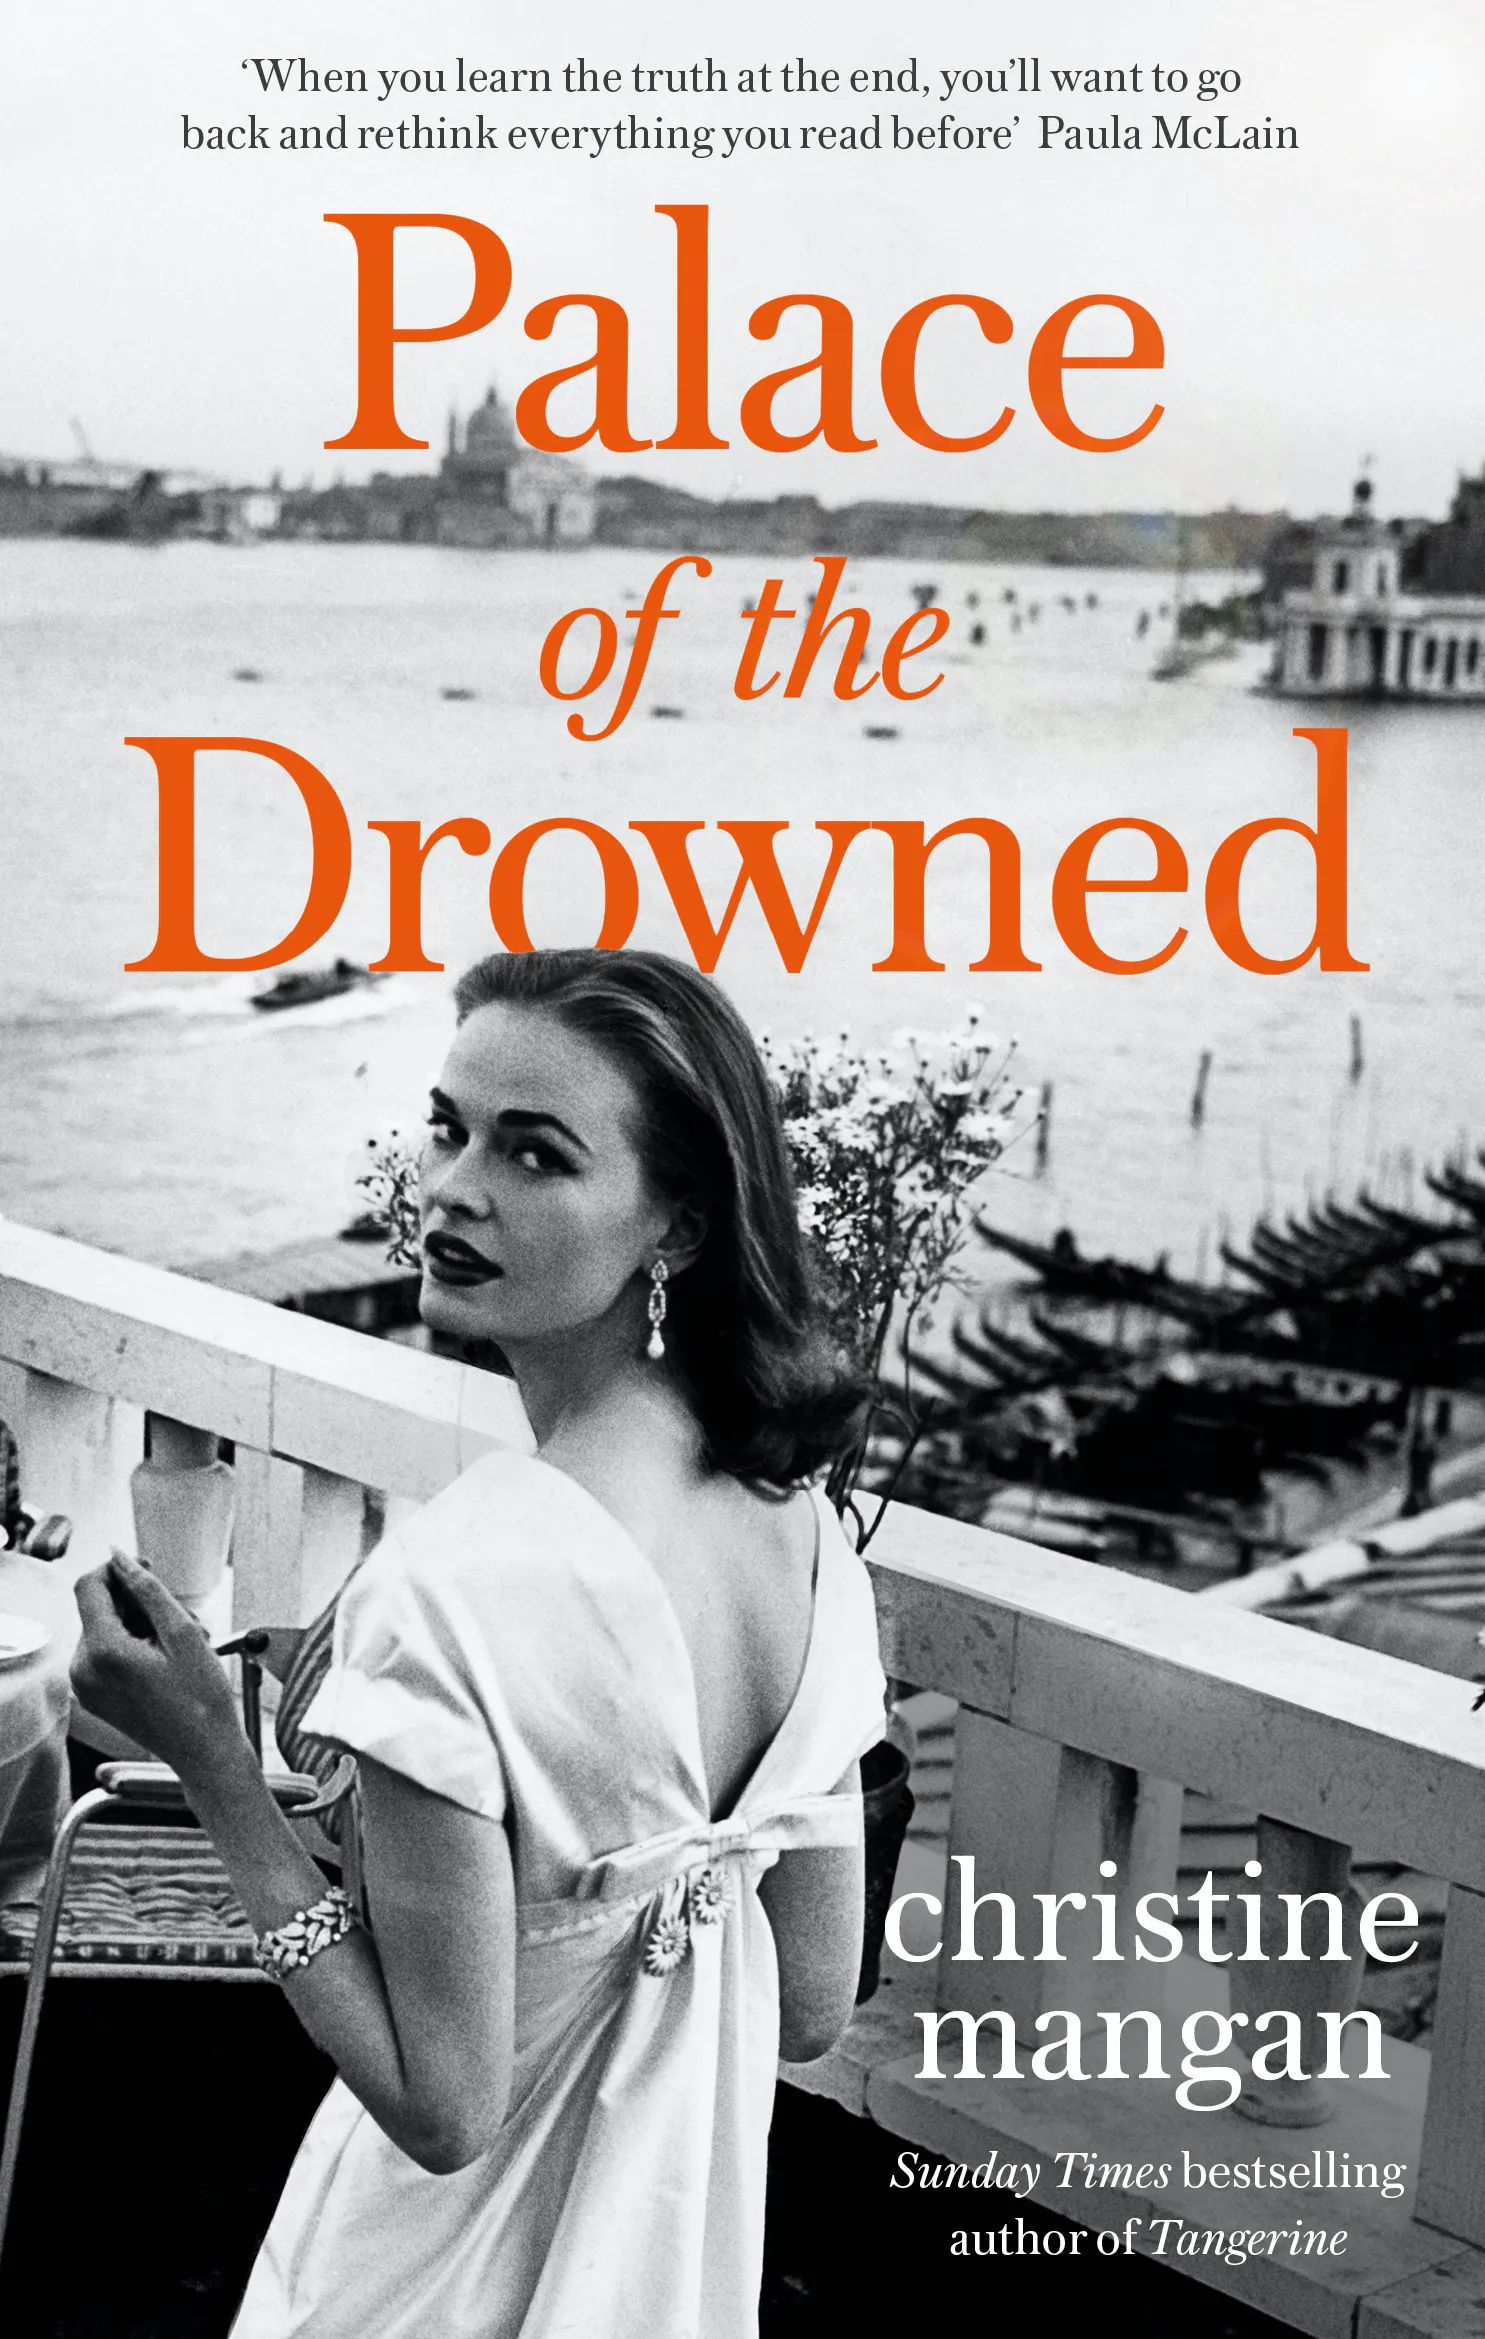 Palace of the Drowned : by the author of the Waterstones Book of the Month, Tangerine